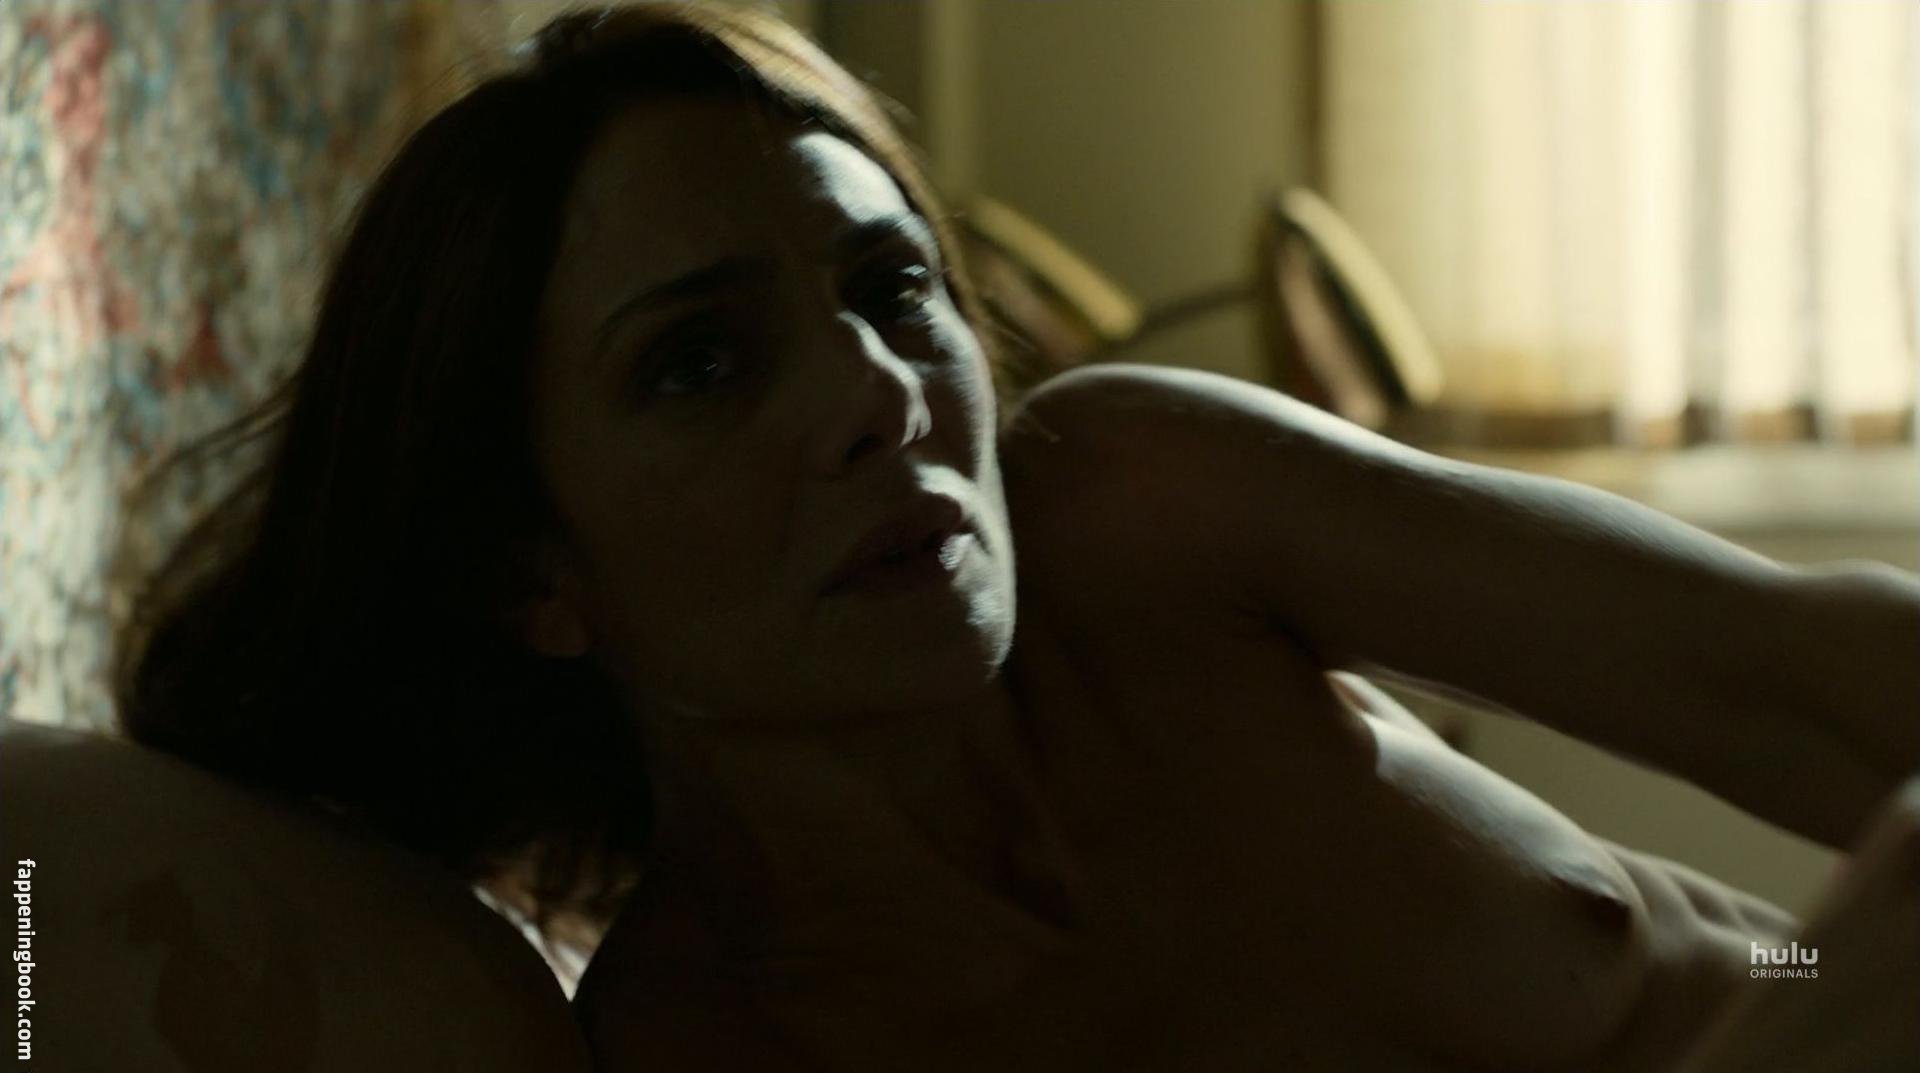 Annie Parisse Nude, The Fappening - Photo #45515 - FappeningBook.